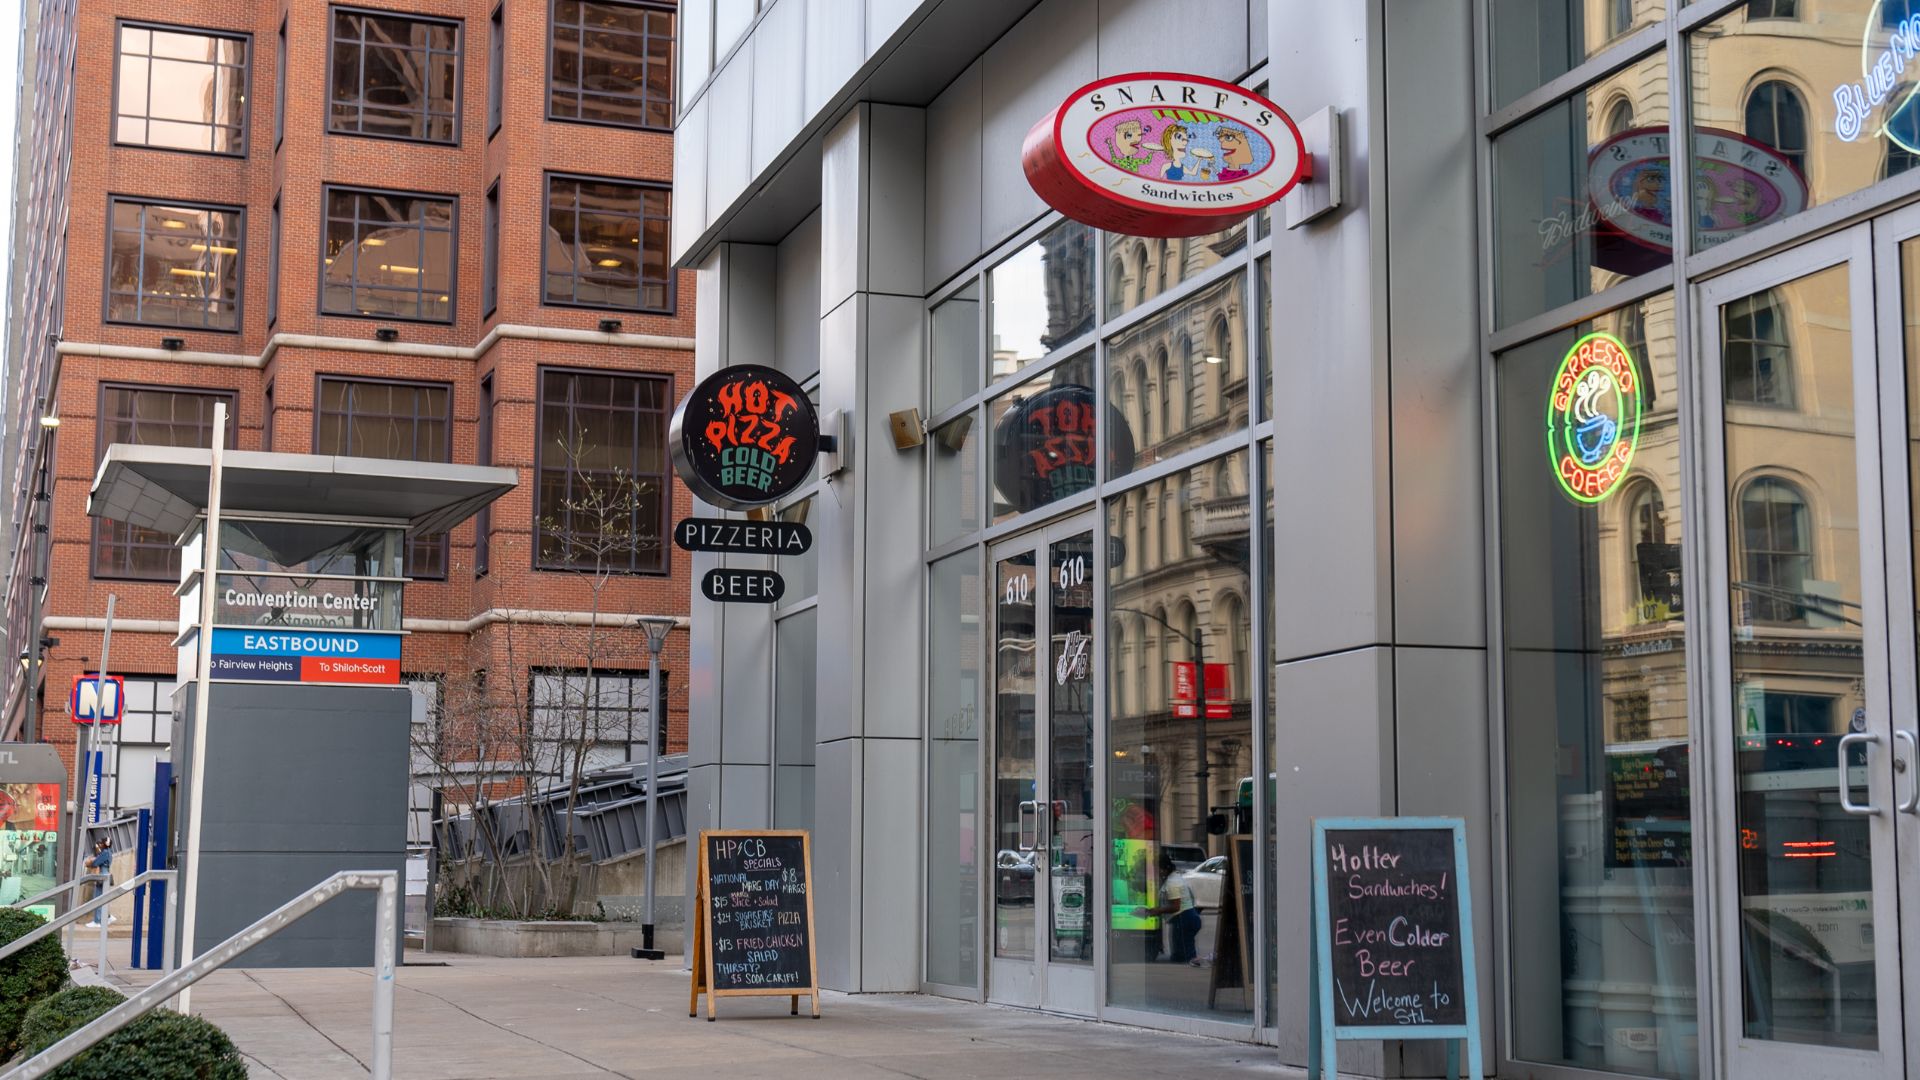 Hot Pizza Cold Beer is located near the Convention Center MetroLink stop in St. Louis.